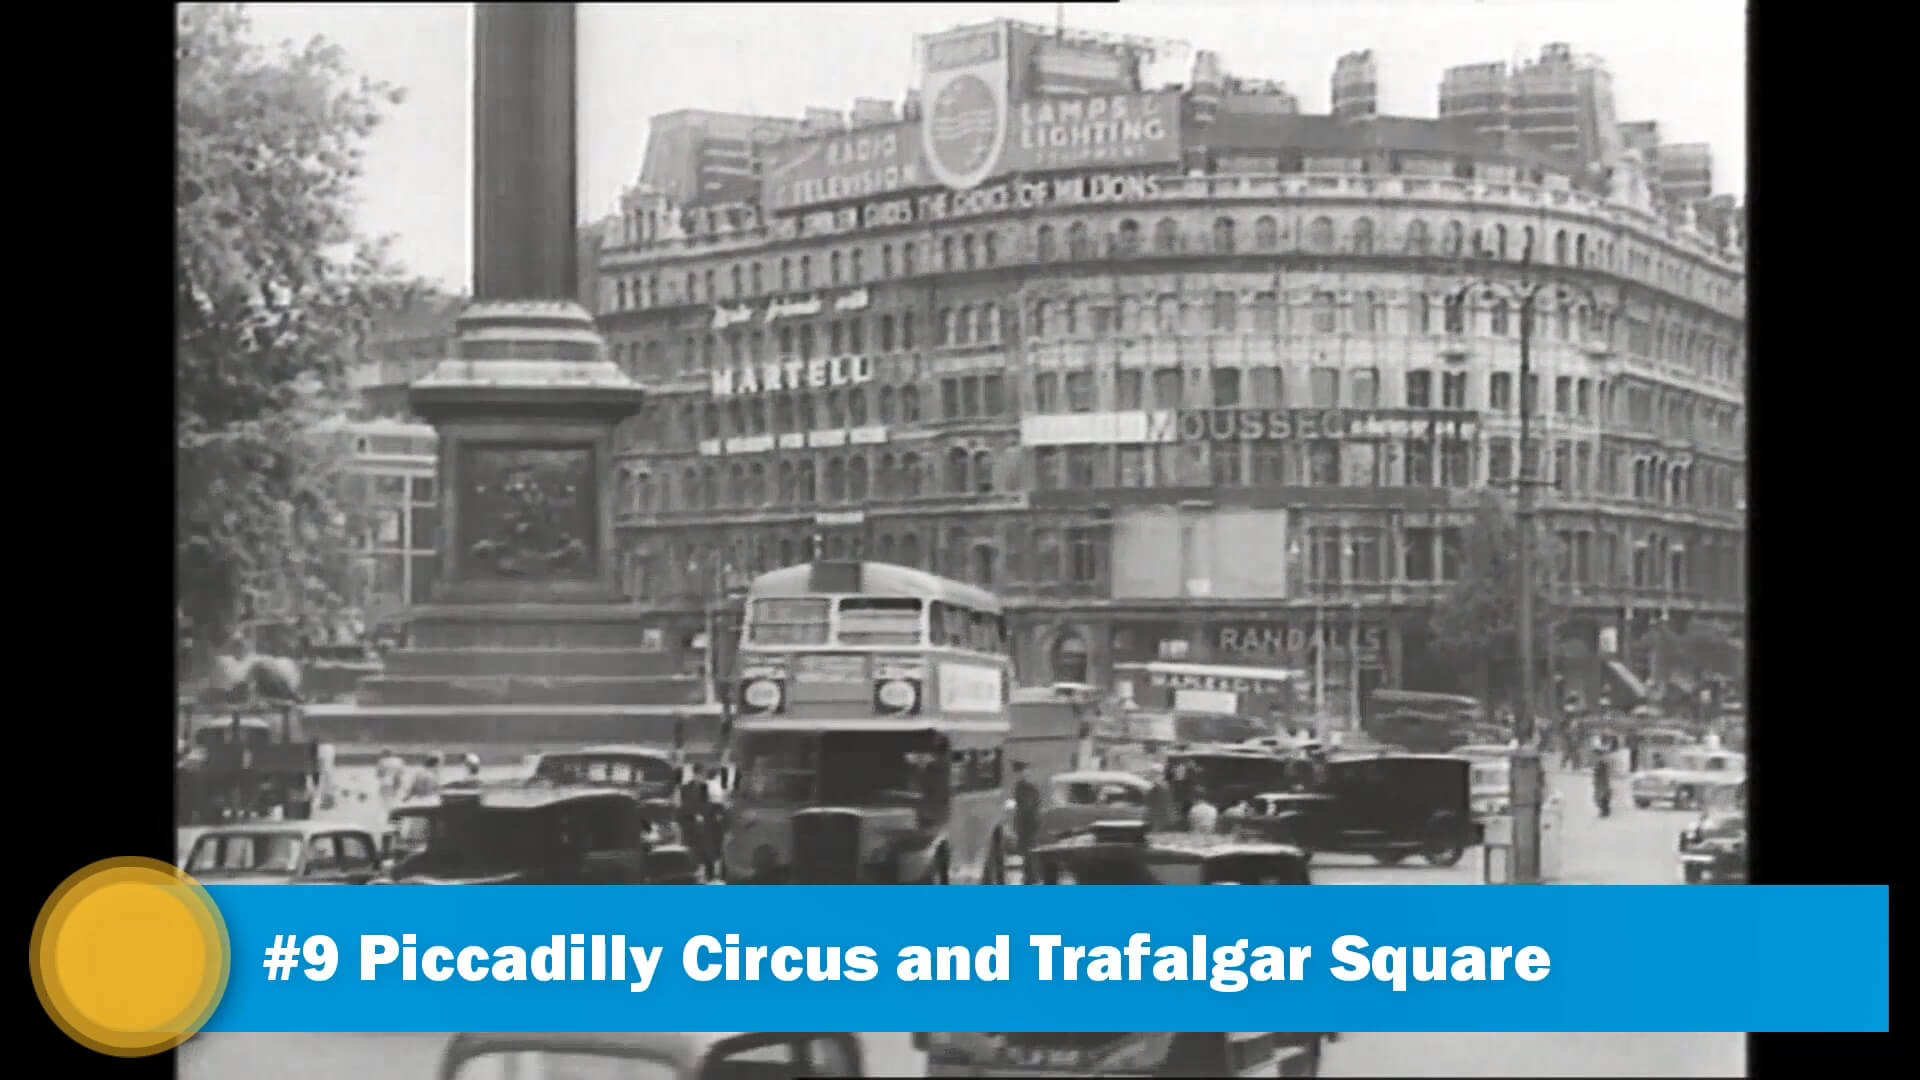 Top Places in London Piccadilly Circus and Trafalgar Square